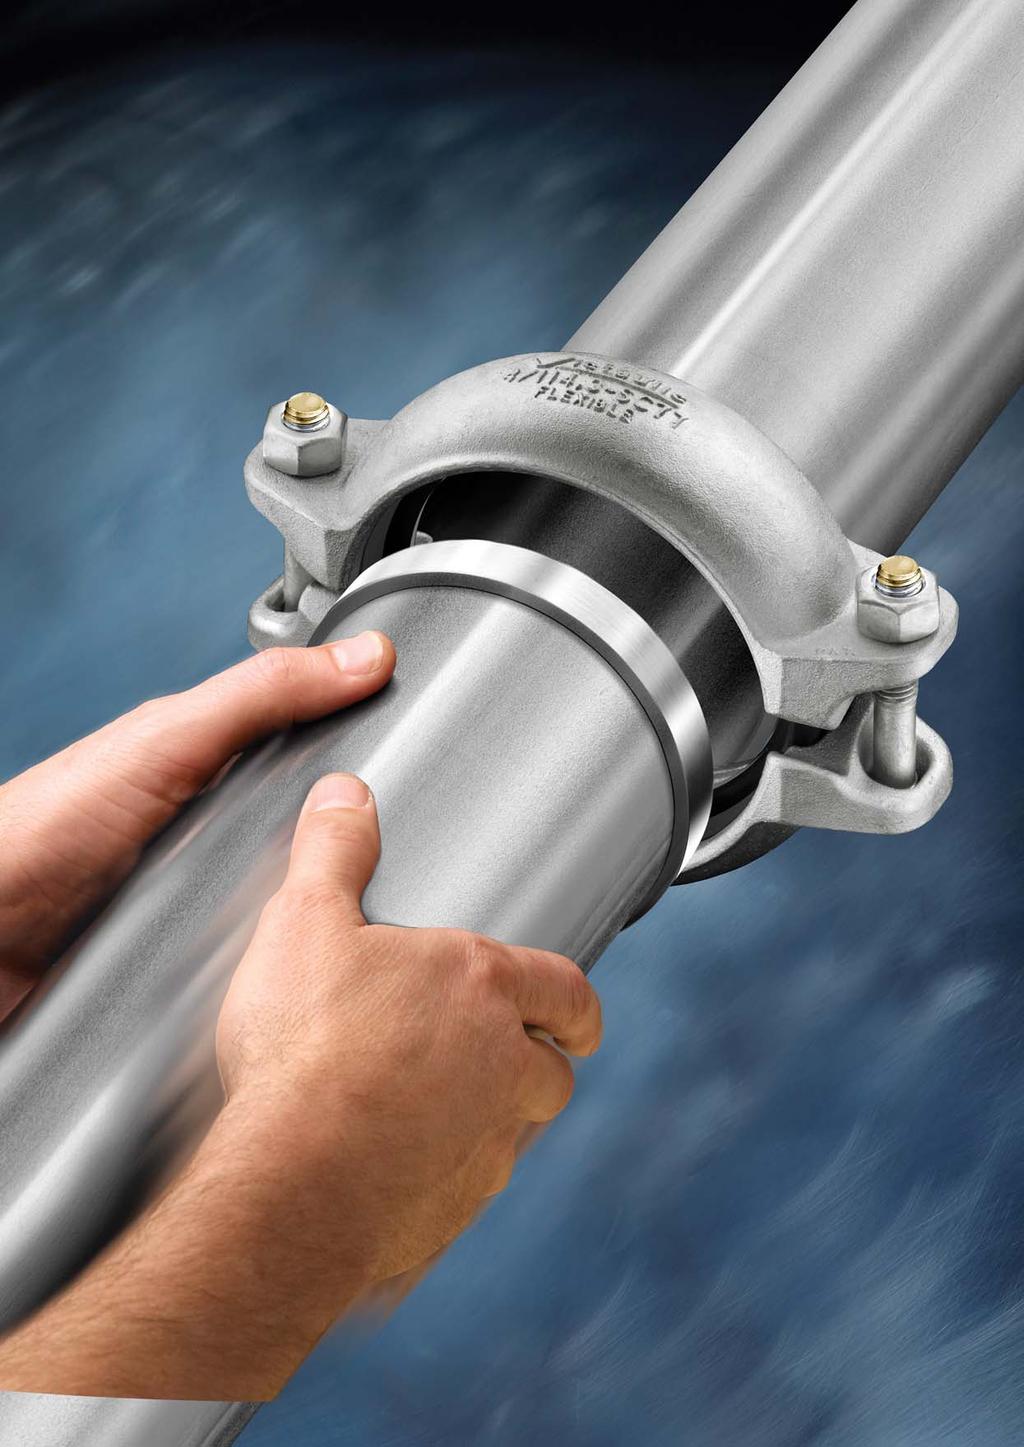 VICTAULIC Shouldered Solutions With a full range of couplings, fittings and valves, Victaulic offers a complete system of